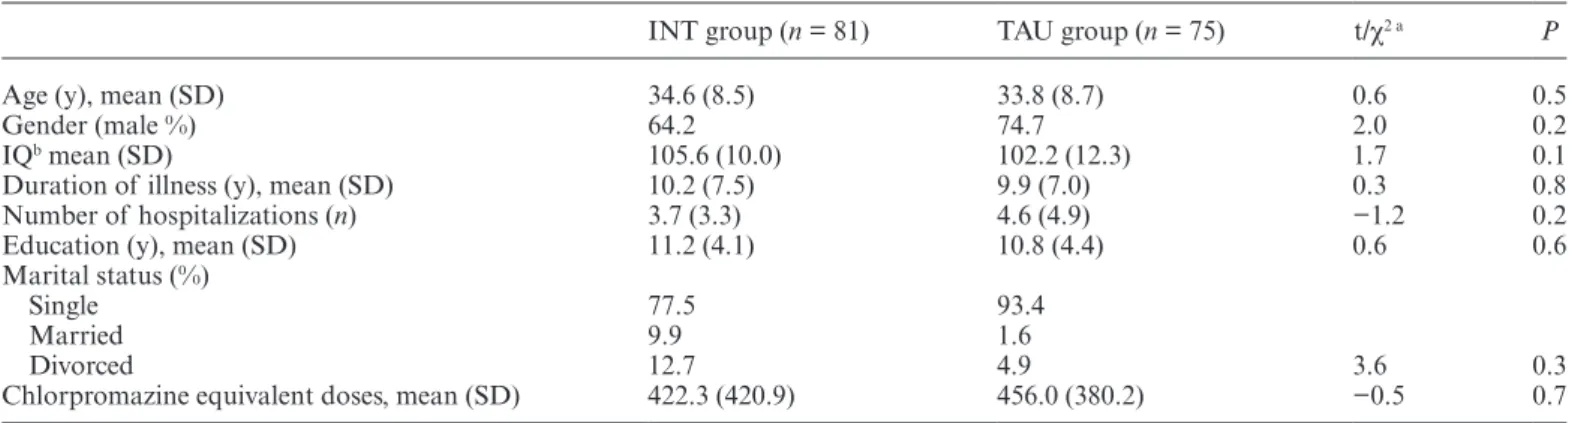 Table 2.  Sample Characteristics of INT and TAU Group